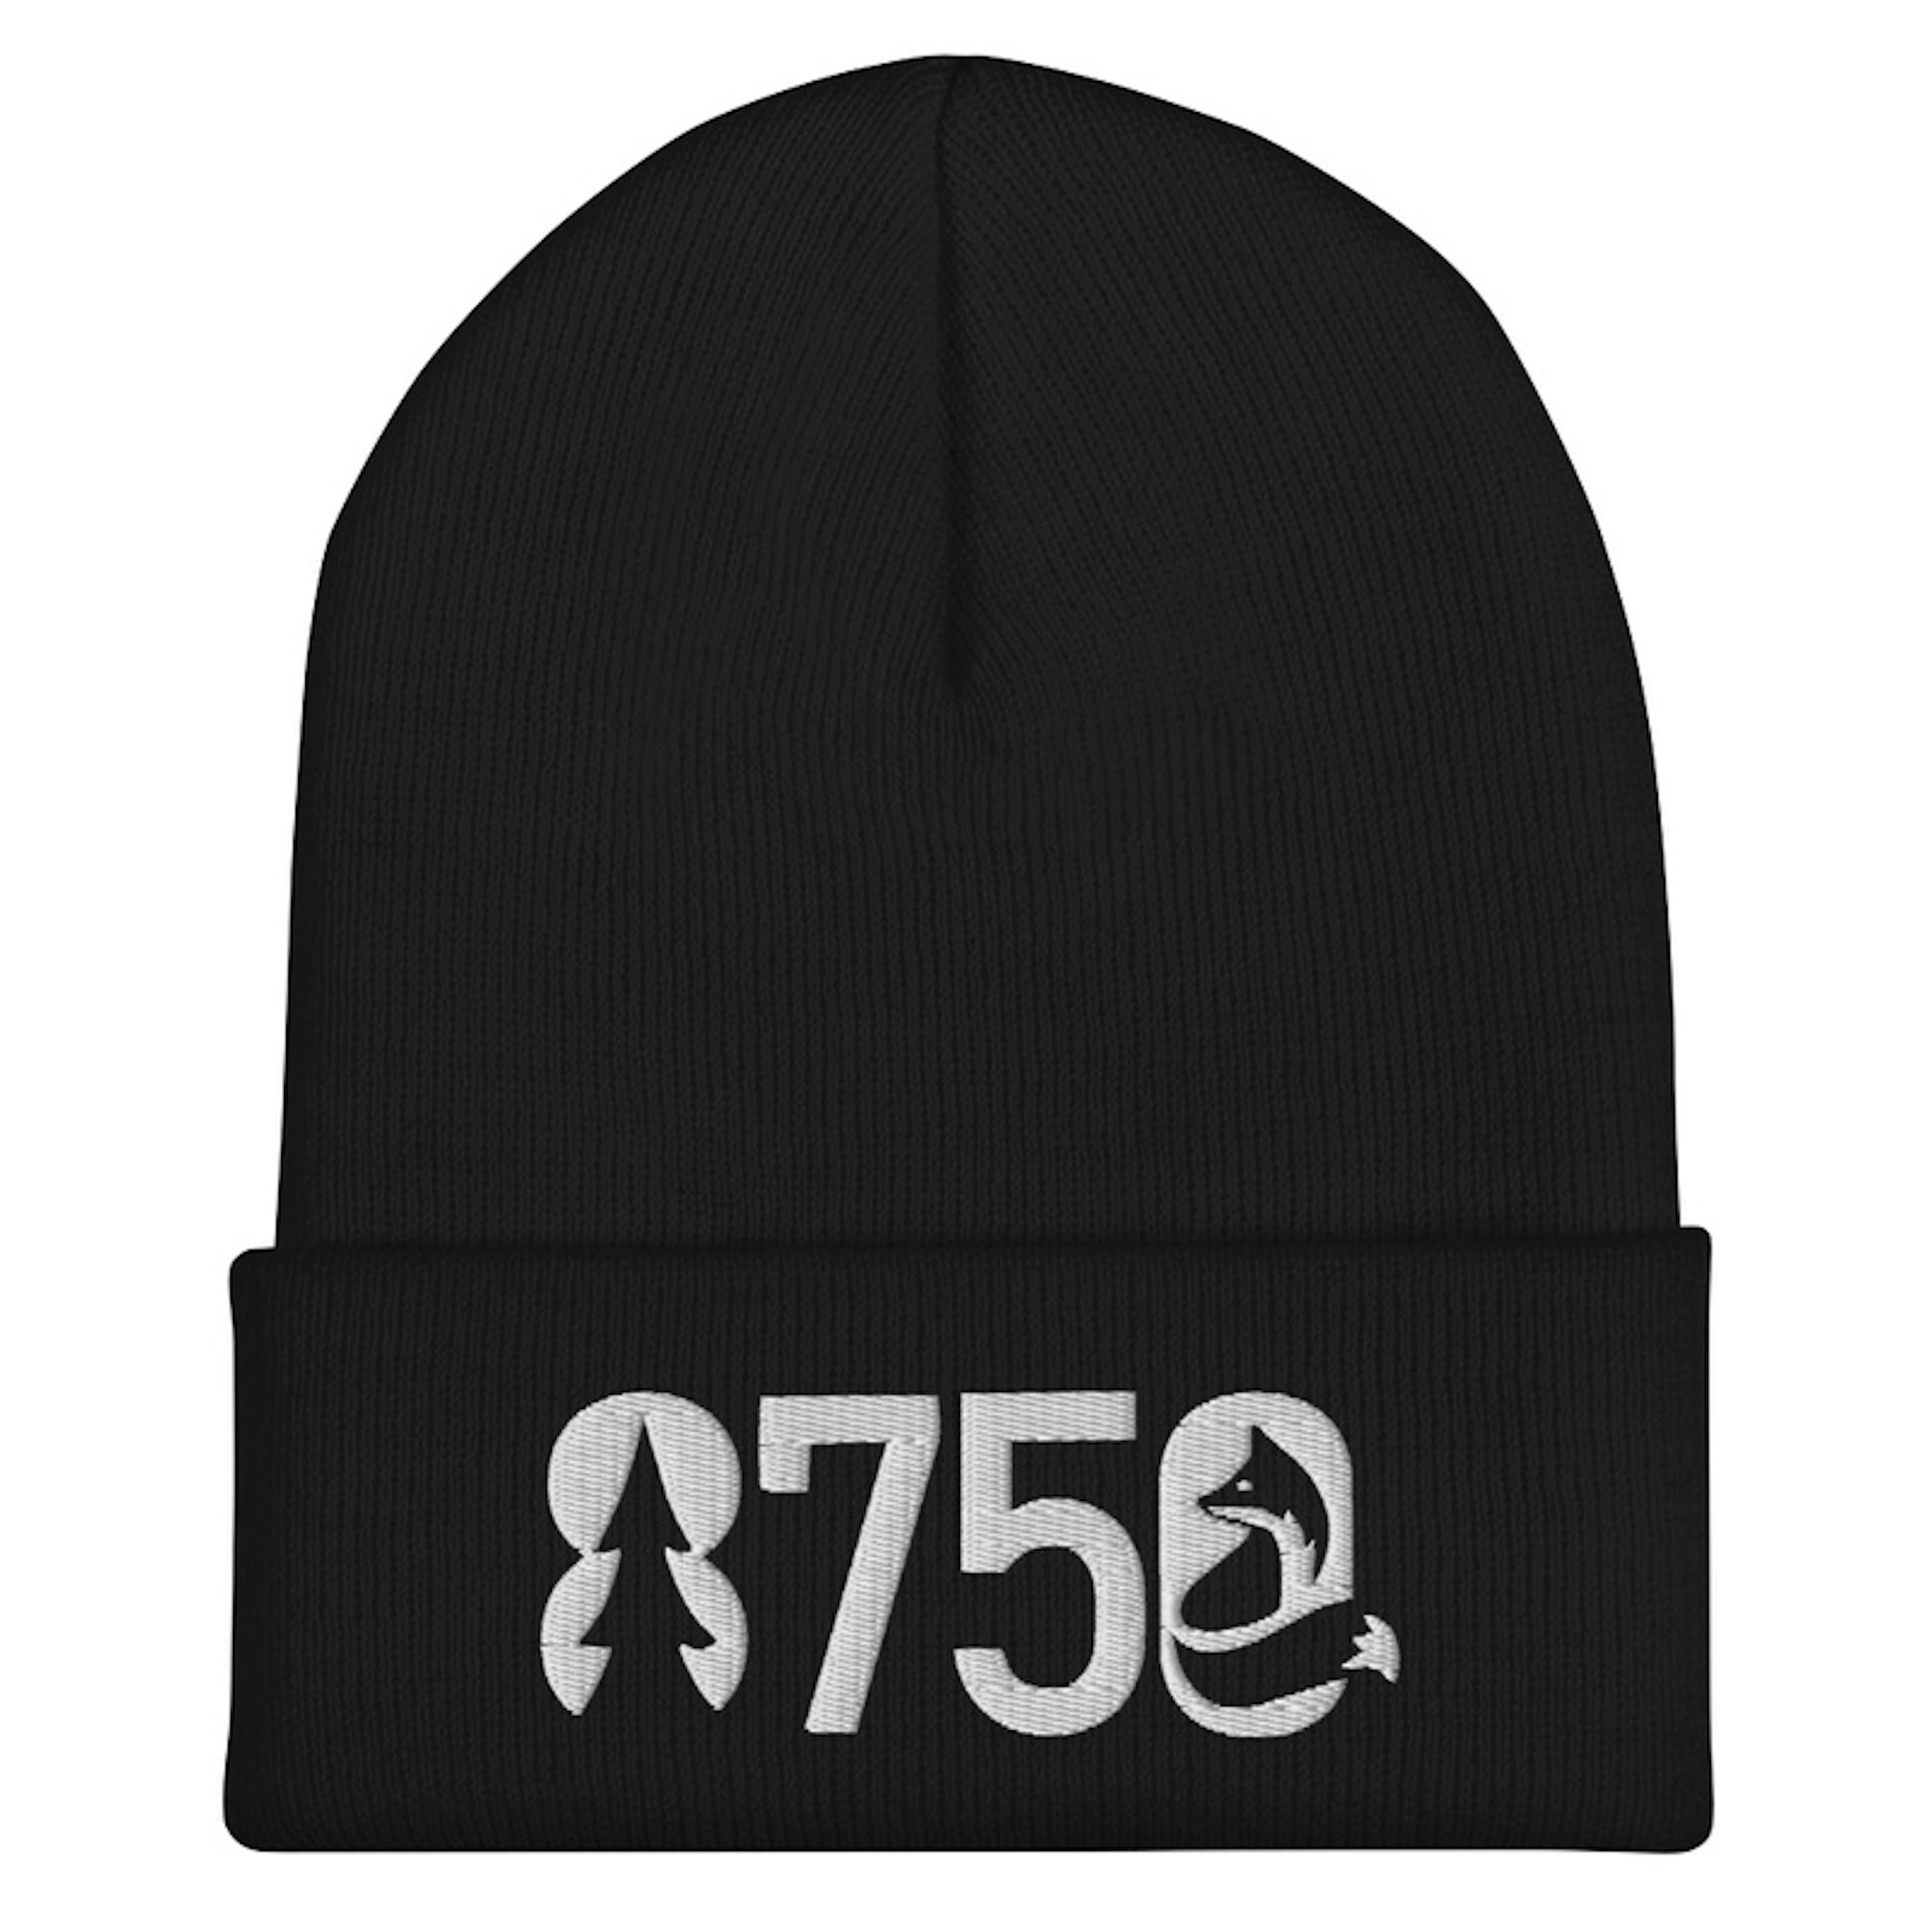 8750 - Back To Nature Beanie